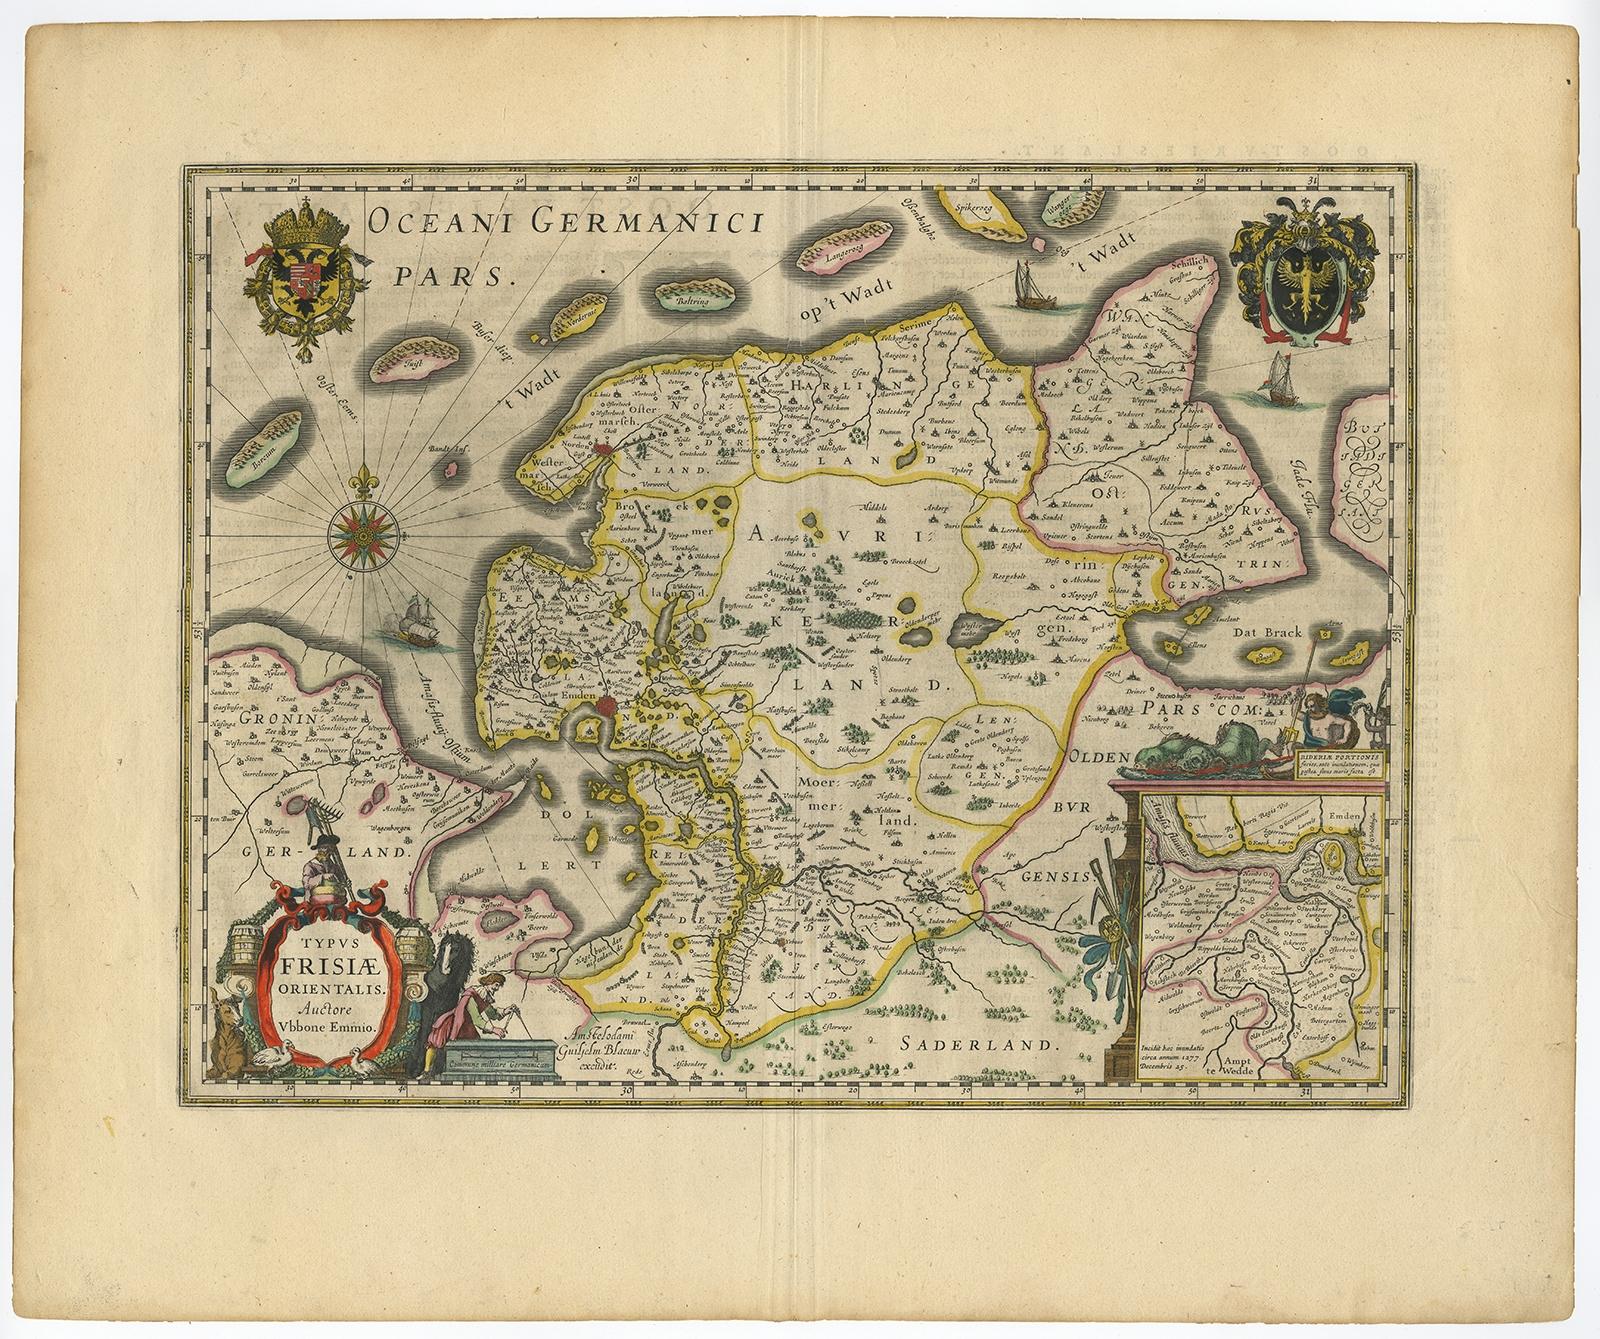 Antique map titled 'Typus Frisiae Orientalis.' 

Map of East Friesland and the area around Emden and Norden. Large inset map of the mouth of the Amasis River. The map is decorated with a large title cartouche and two large coats of arms, plus